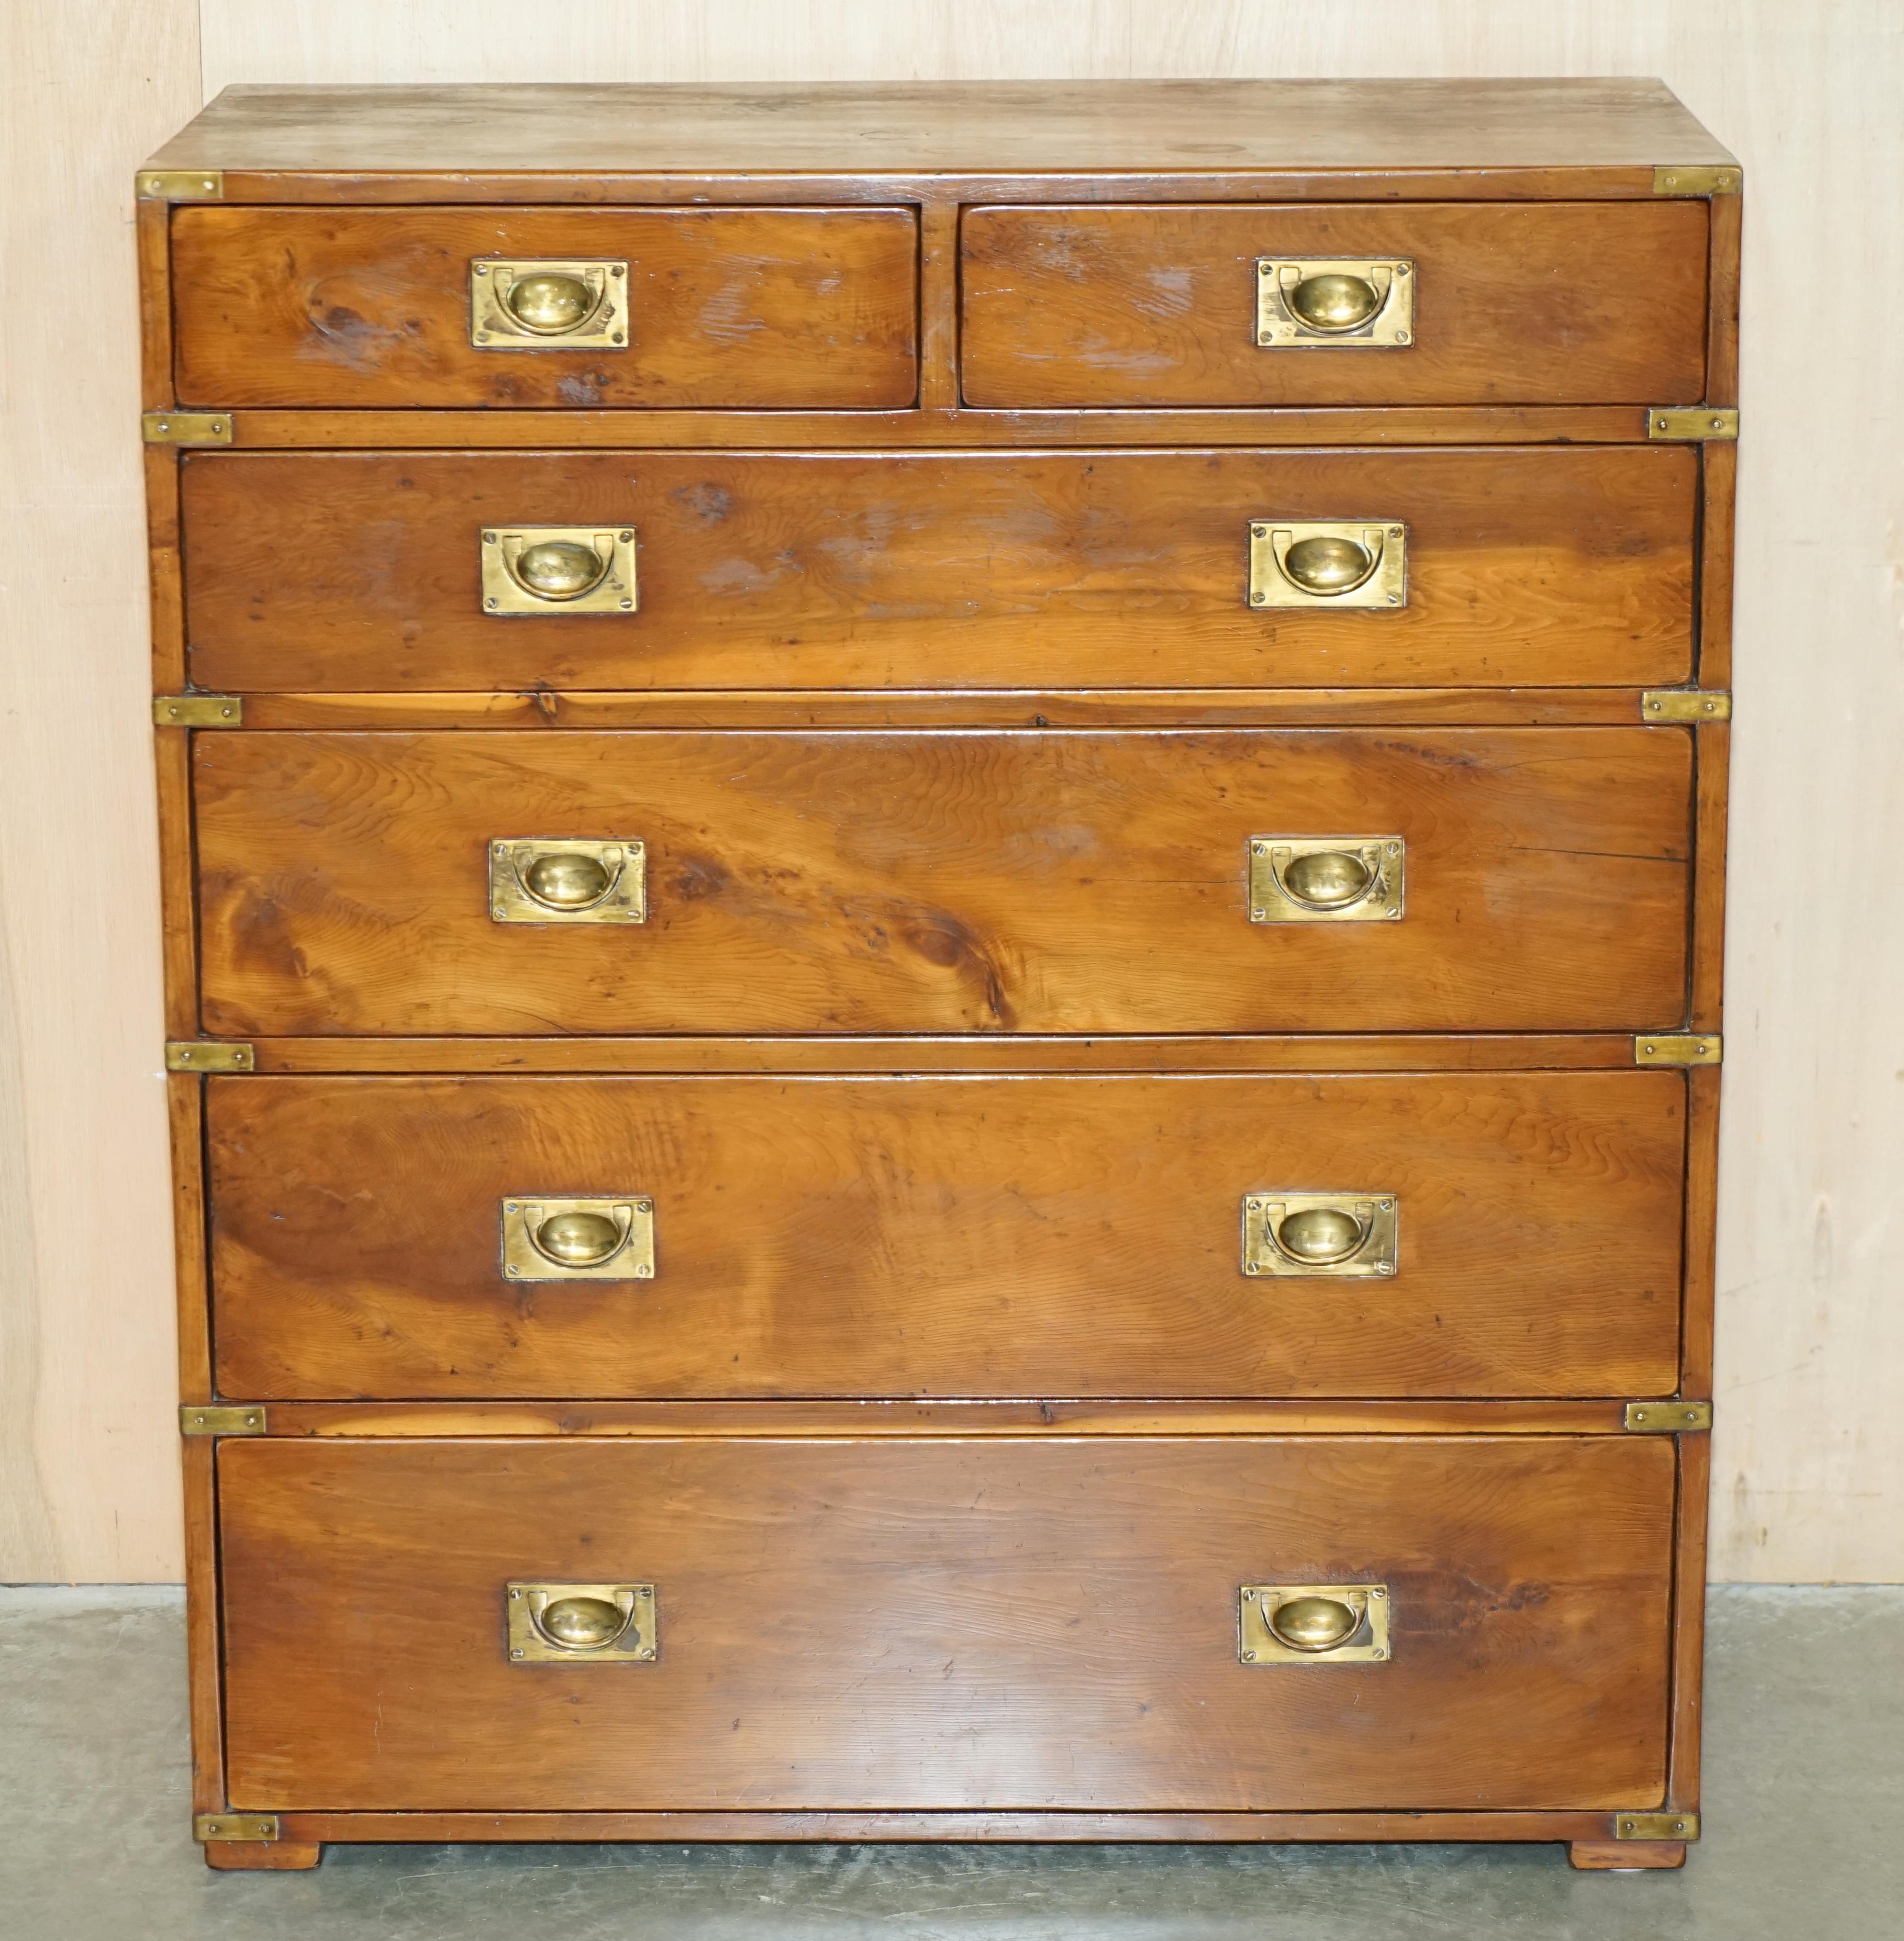 Royal House Antiques

Royal House Antiques is delighted to offer for sale this lovely tall Military Campaign chest of drawers in Elm with the rare two over four formation 

Please note the delivery fee listed is just a guide, it covers within the